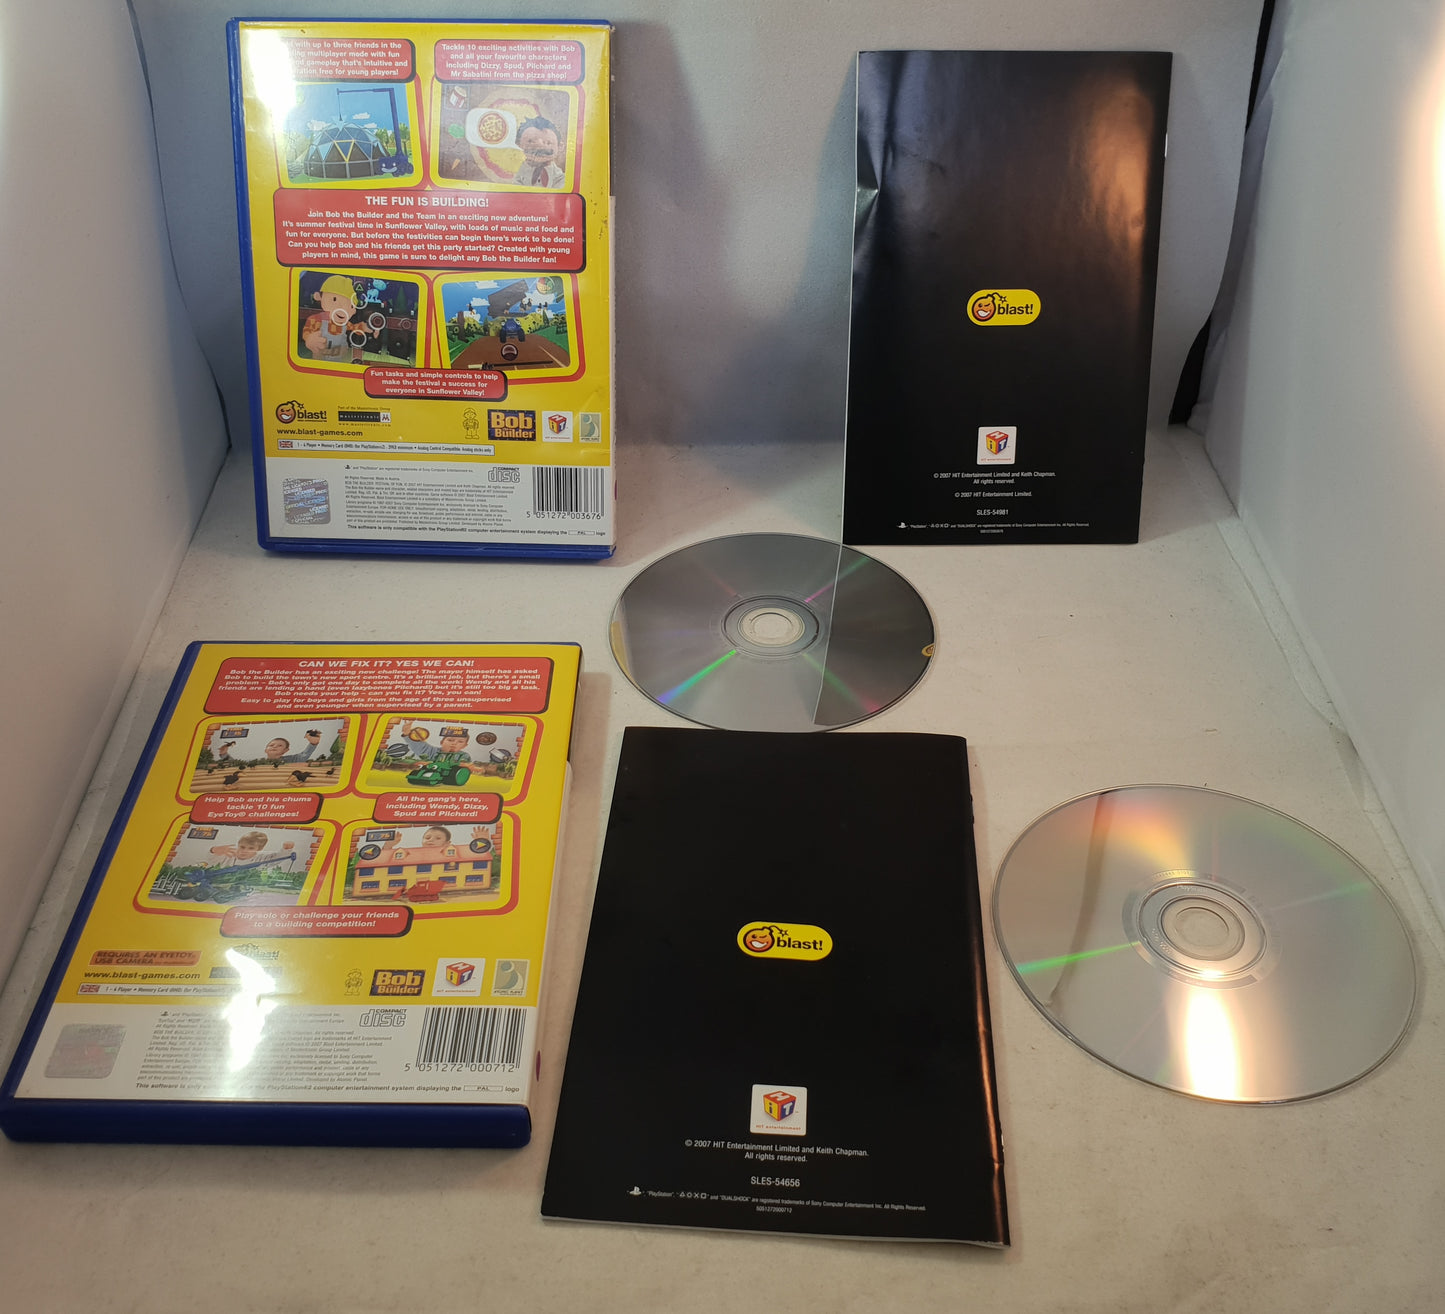 Bob the Builder & Bob the Builder Festival of Fun with Boxed Eye Toy Sony Playstation 2 (PS2) Game Bundle